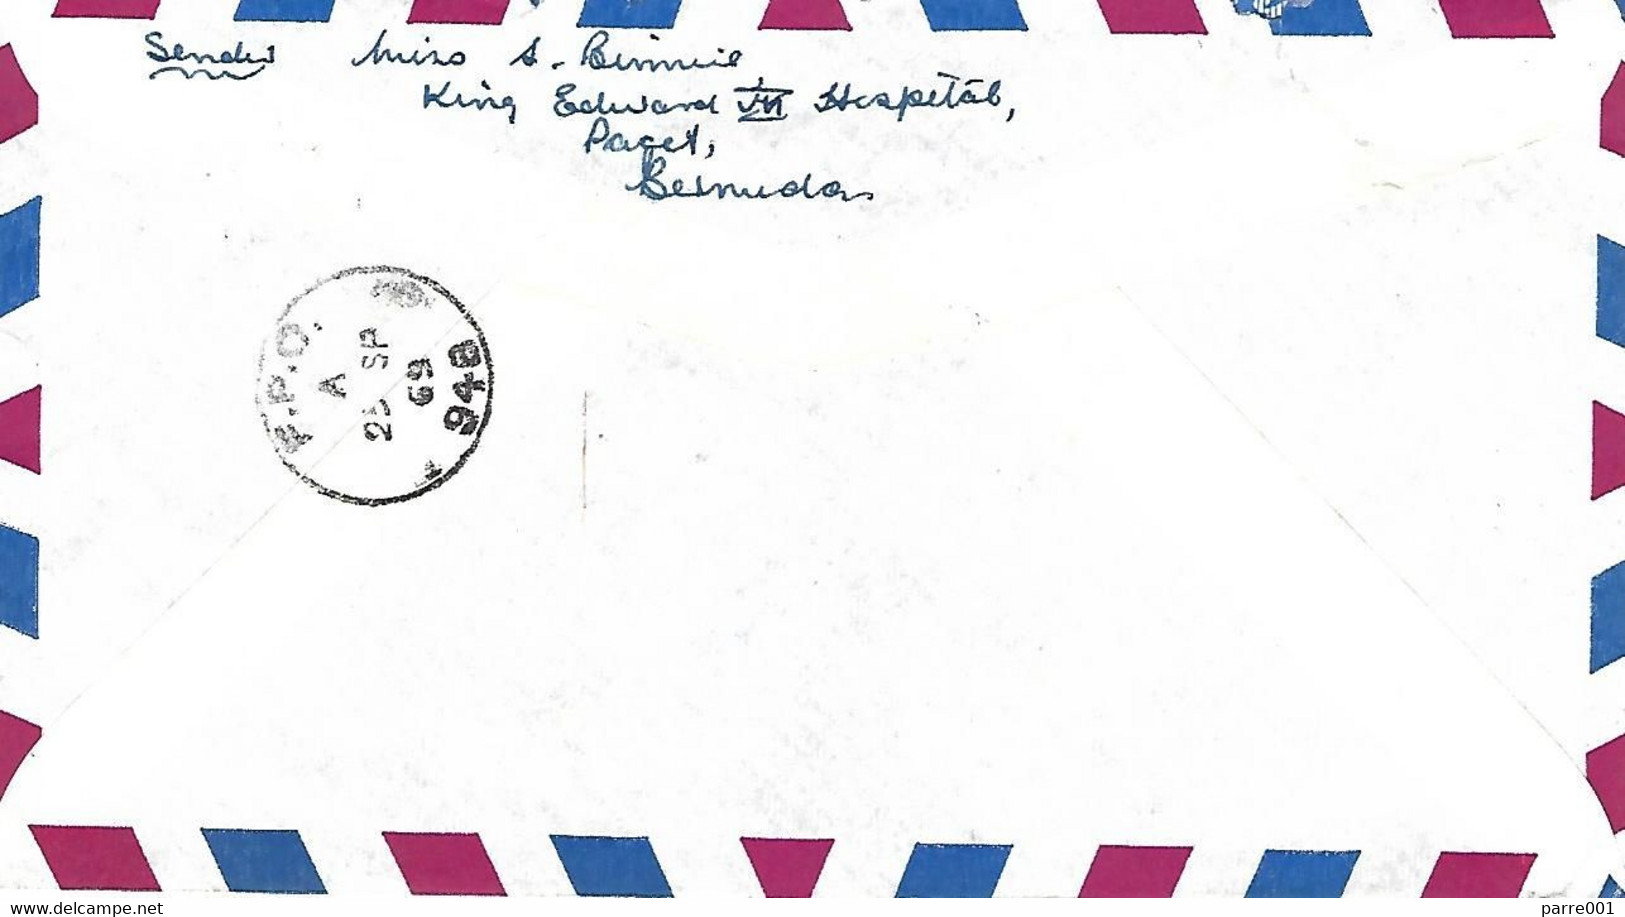 Bermuda 1974 FPO 948 BFPO1 Kowloon 40 Postal Courrier Communications Unit Royal Engineers Forces Official Cover - Briefe U. Dokumente